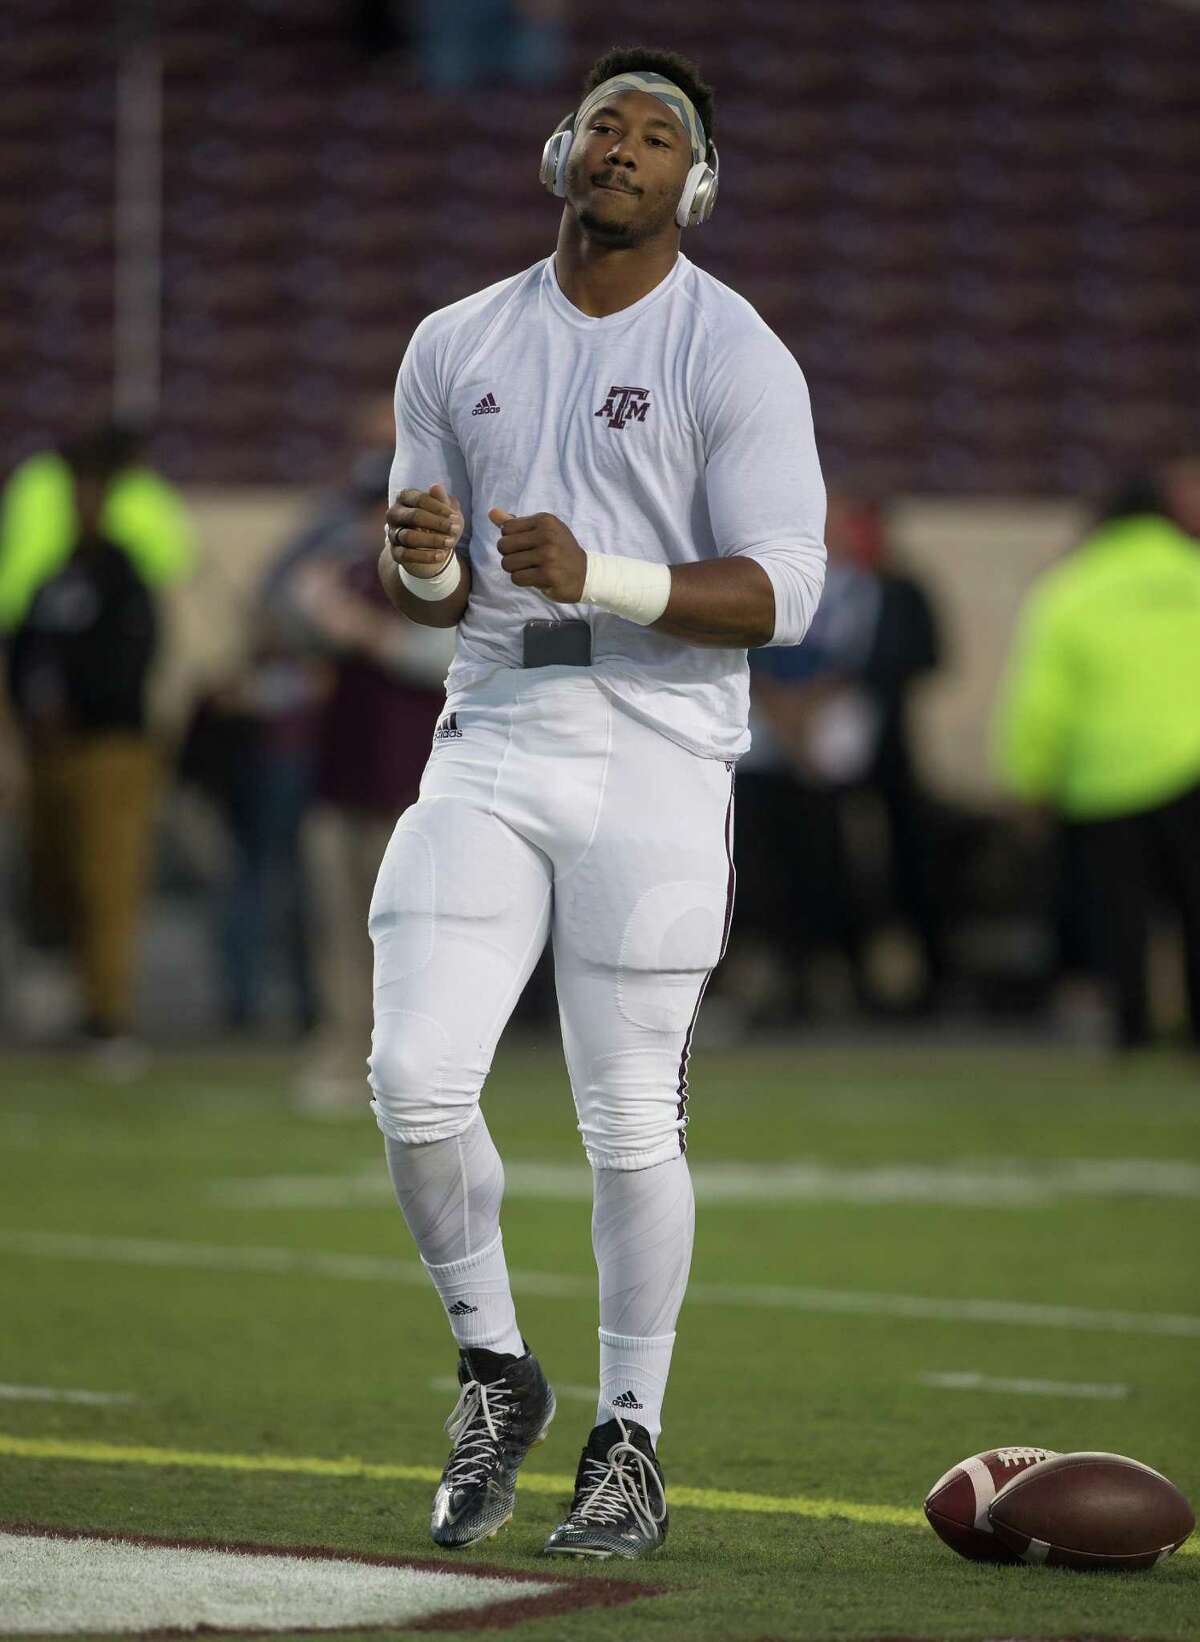 Myles Garrett of the Texas A&M Aggies warms up before playing LSU Tigers at Kyle Field on Nov. 24, 2016 in College Station.